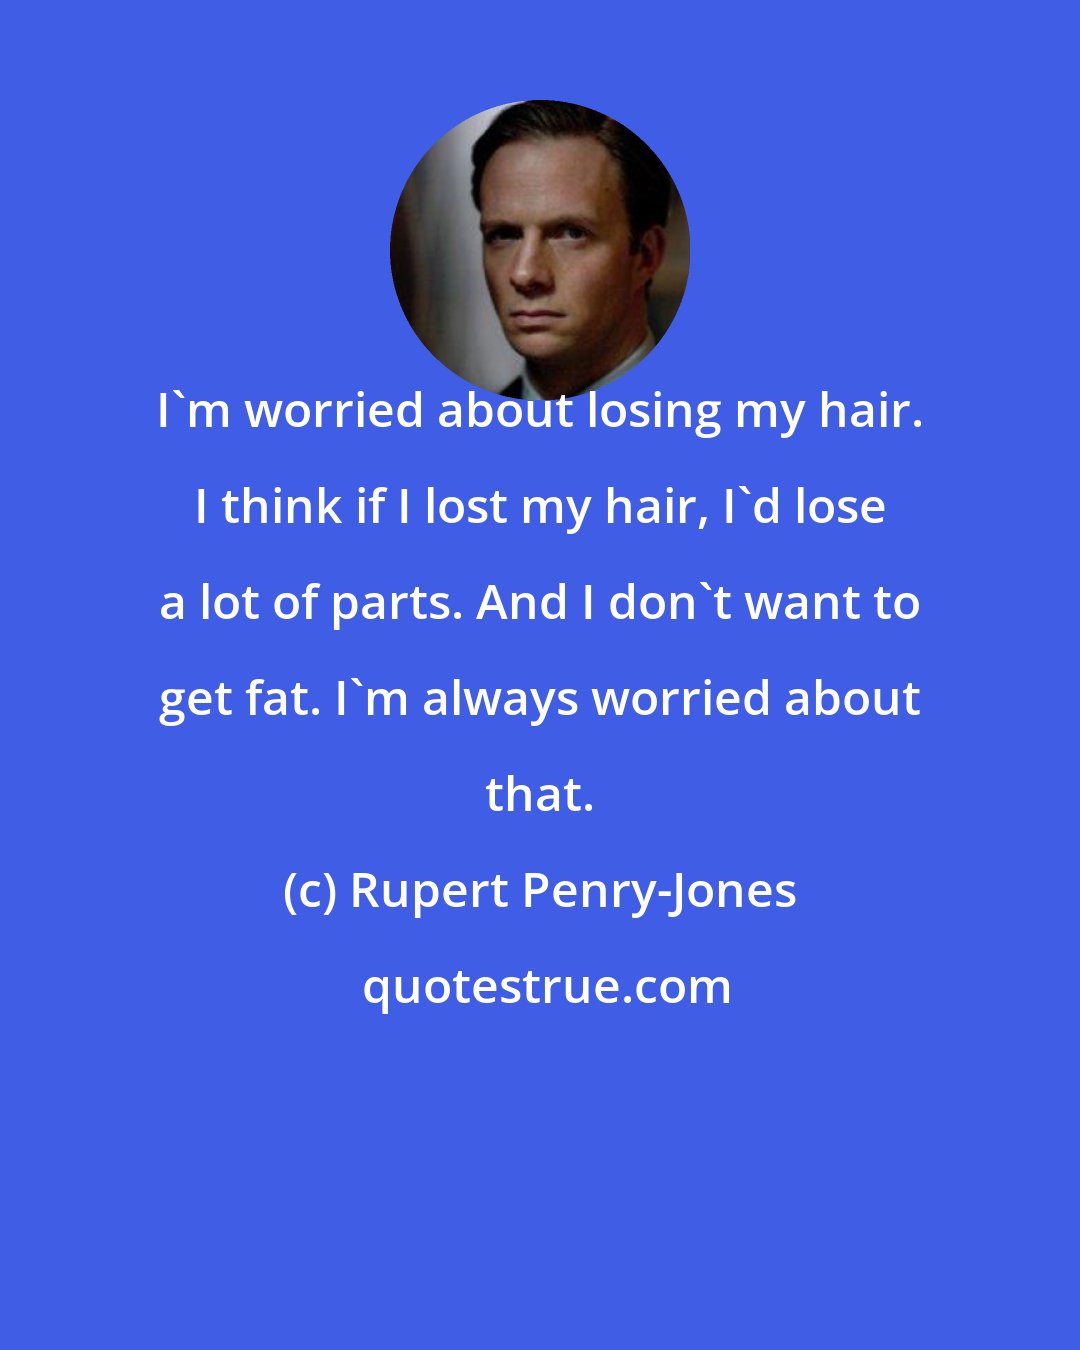 Rupert Penry-Jones: I'm worried about losing my hair. I think if I lost my hair, I'd lose a lot of parts. And I don't want to get fat. I'm always worried about that.